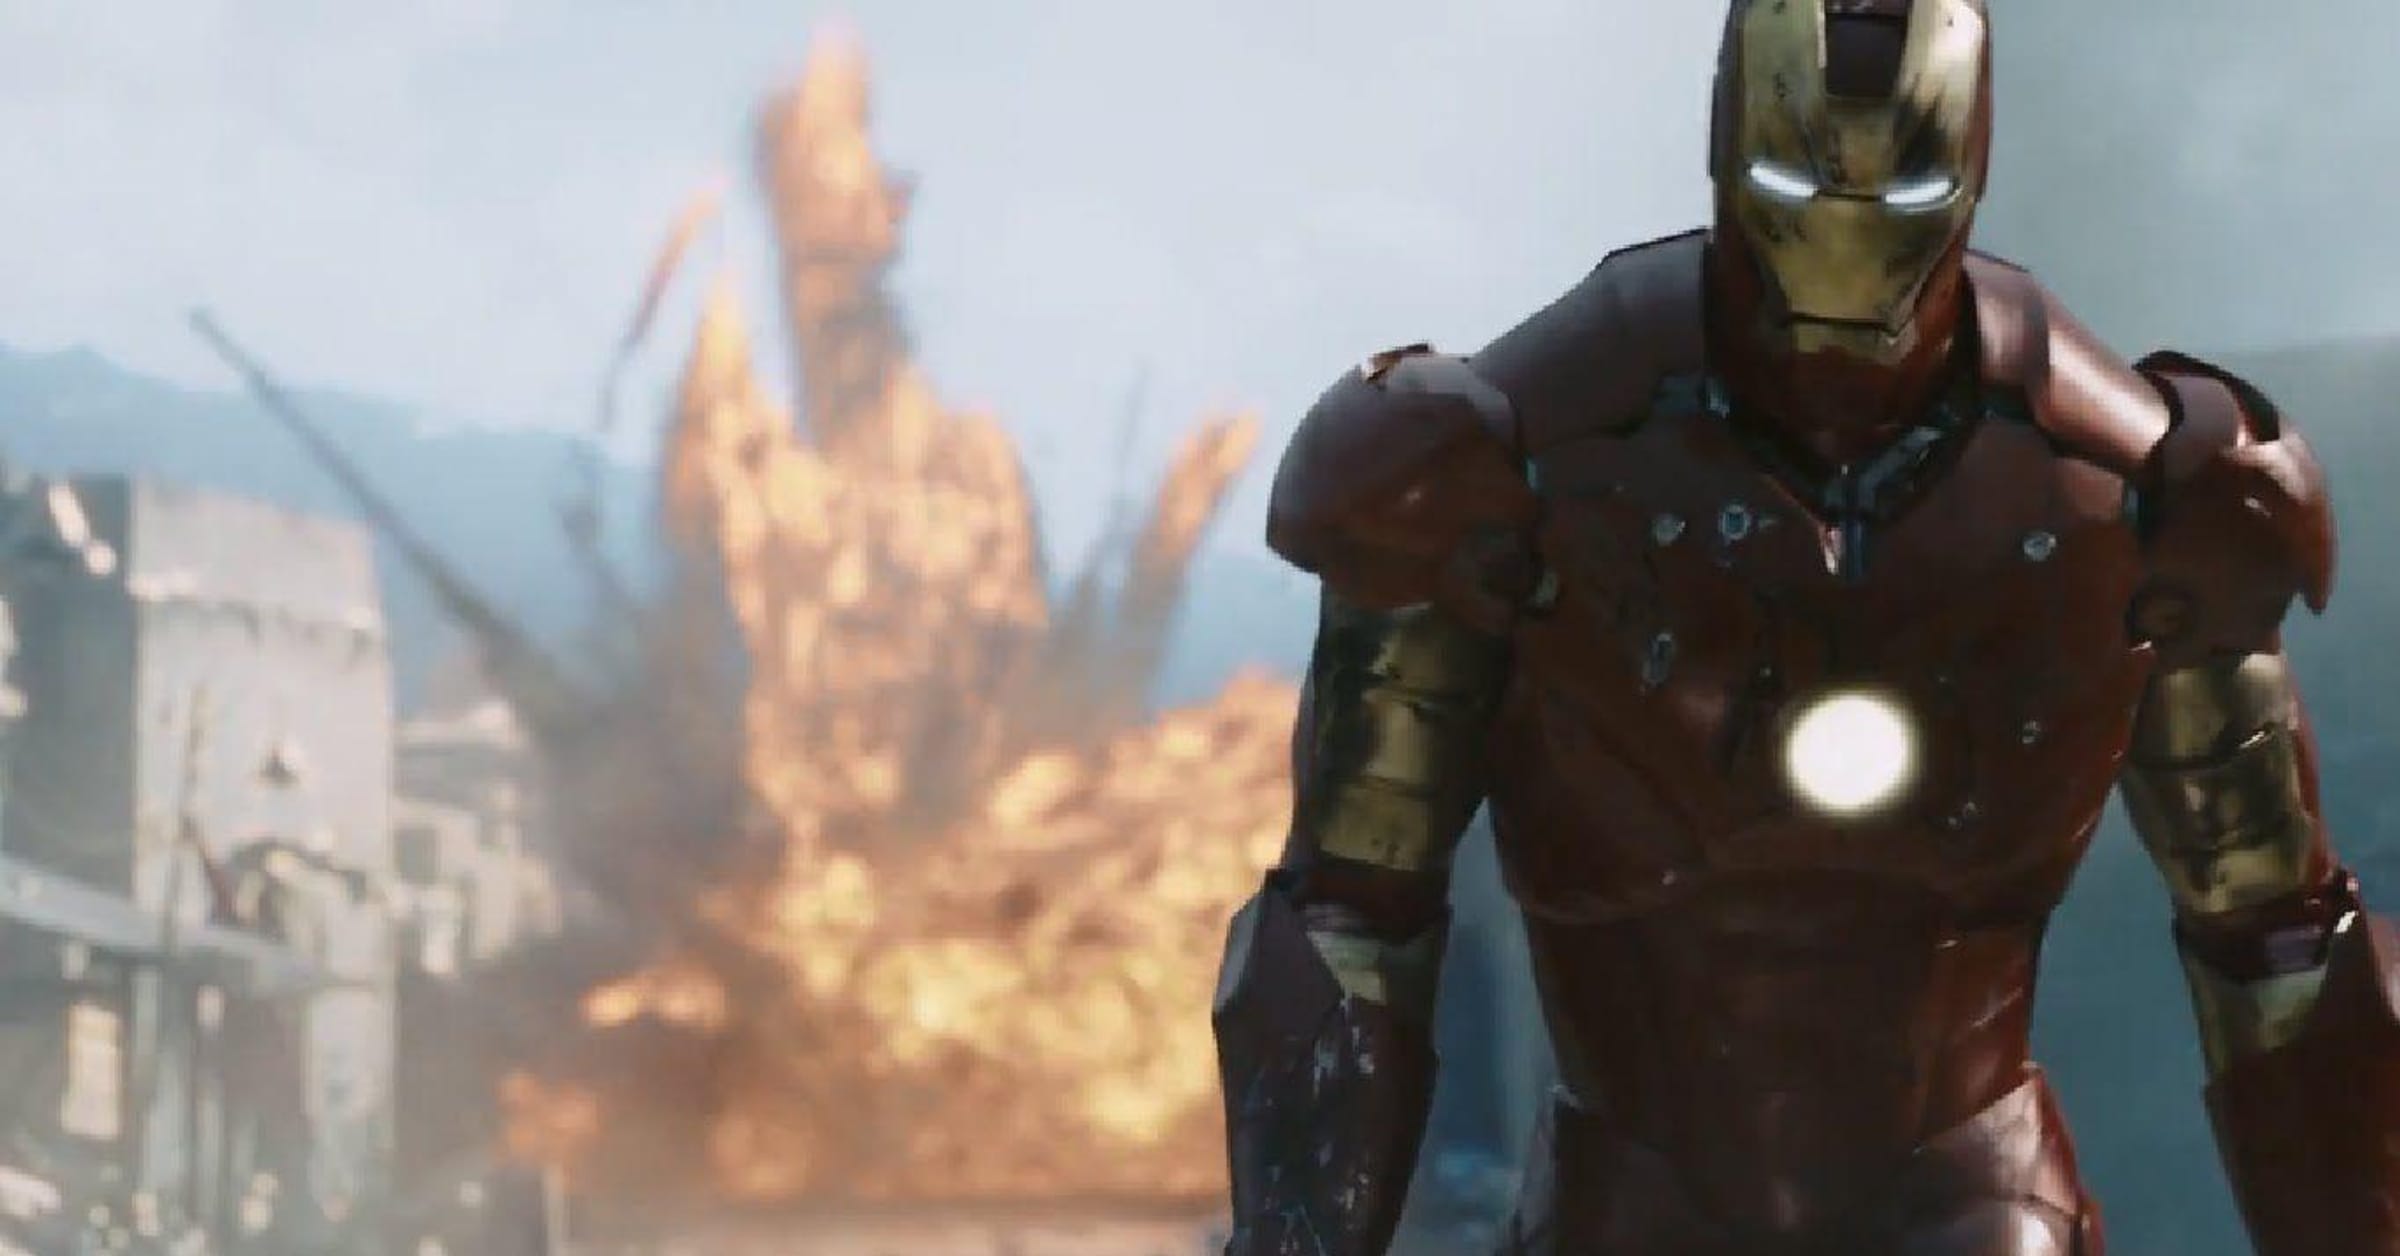 Iron Man Was the Only Way the MCU Could Have Kicked Off